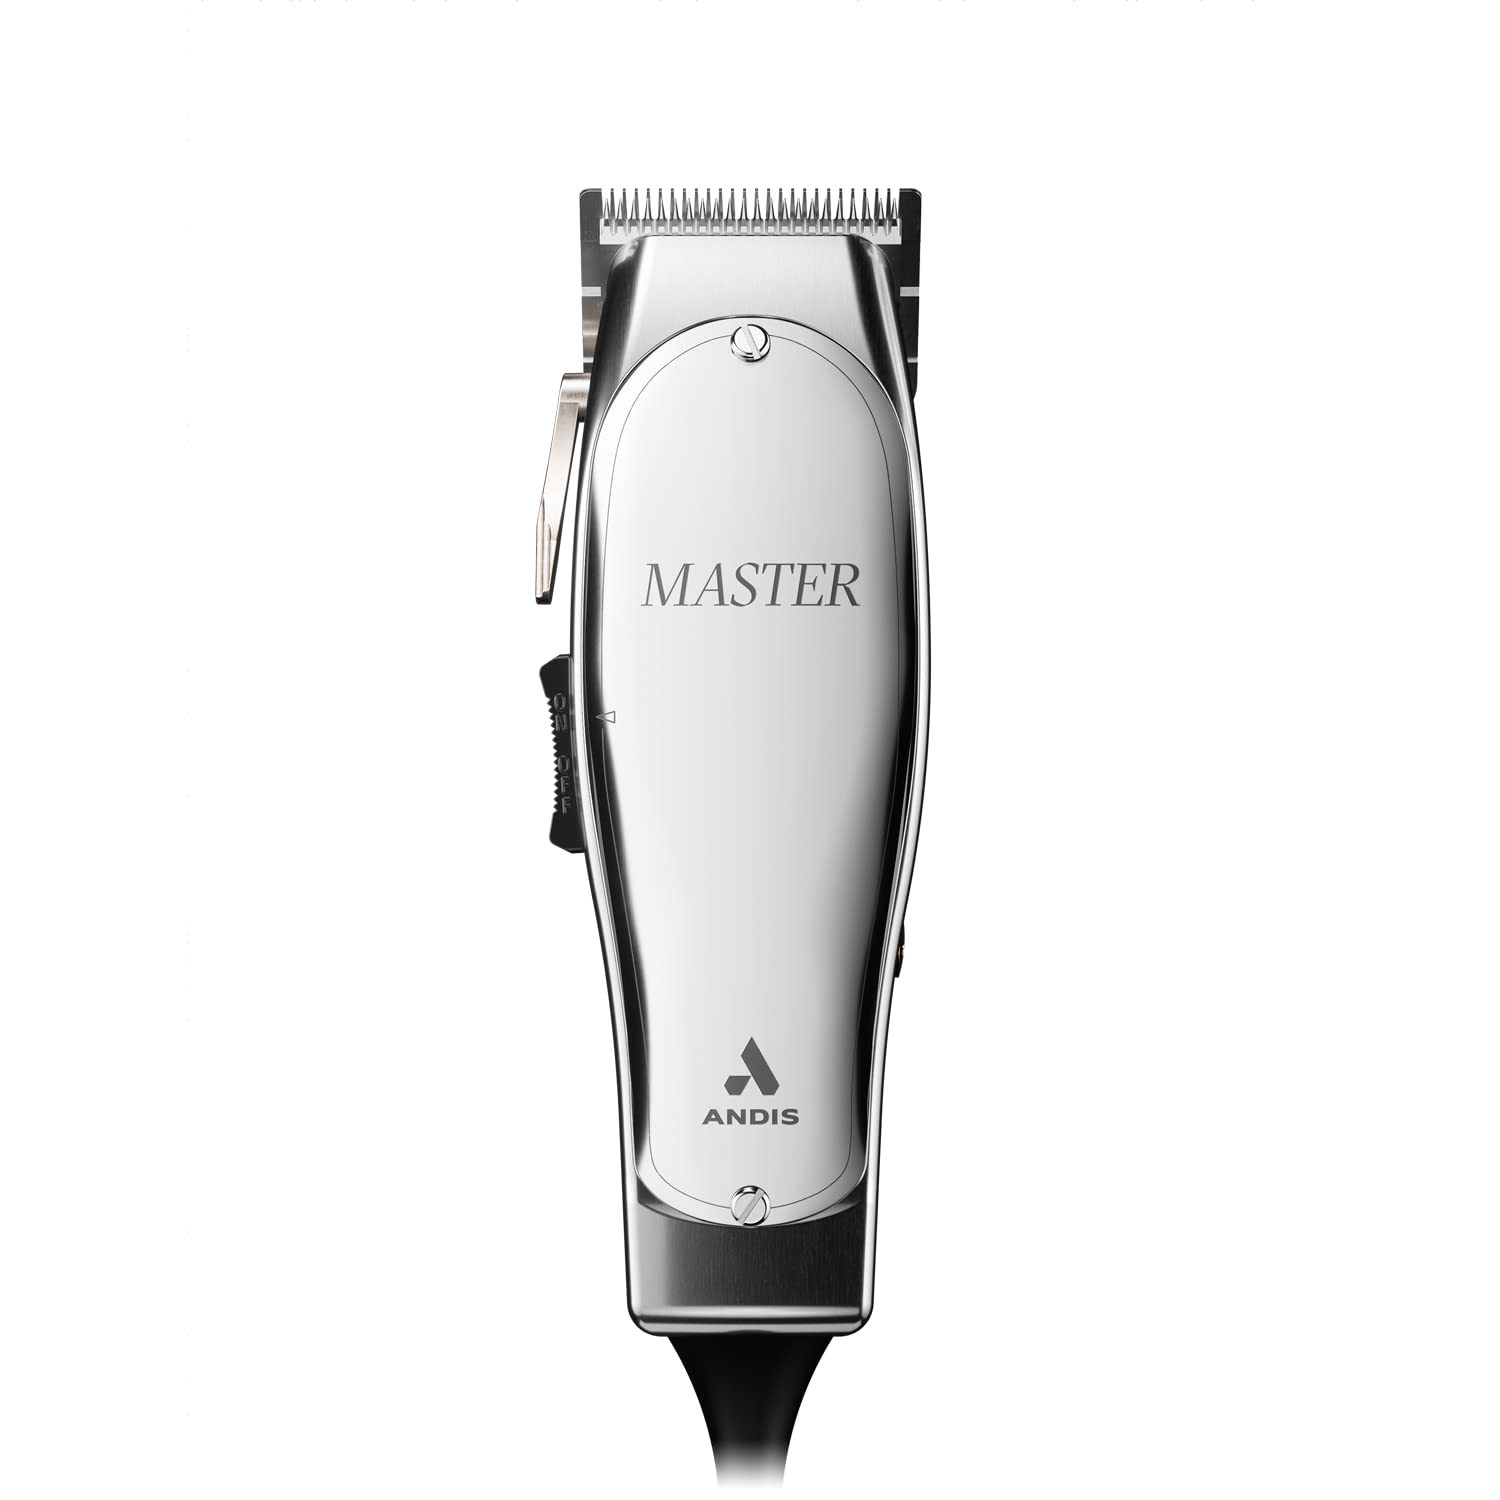 Primary image for Professional Master Adjustable Blade Hair Trimmer, Silver,, Blade, Andis 01815.